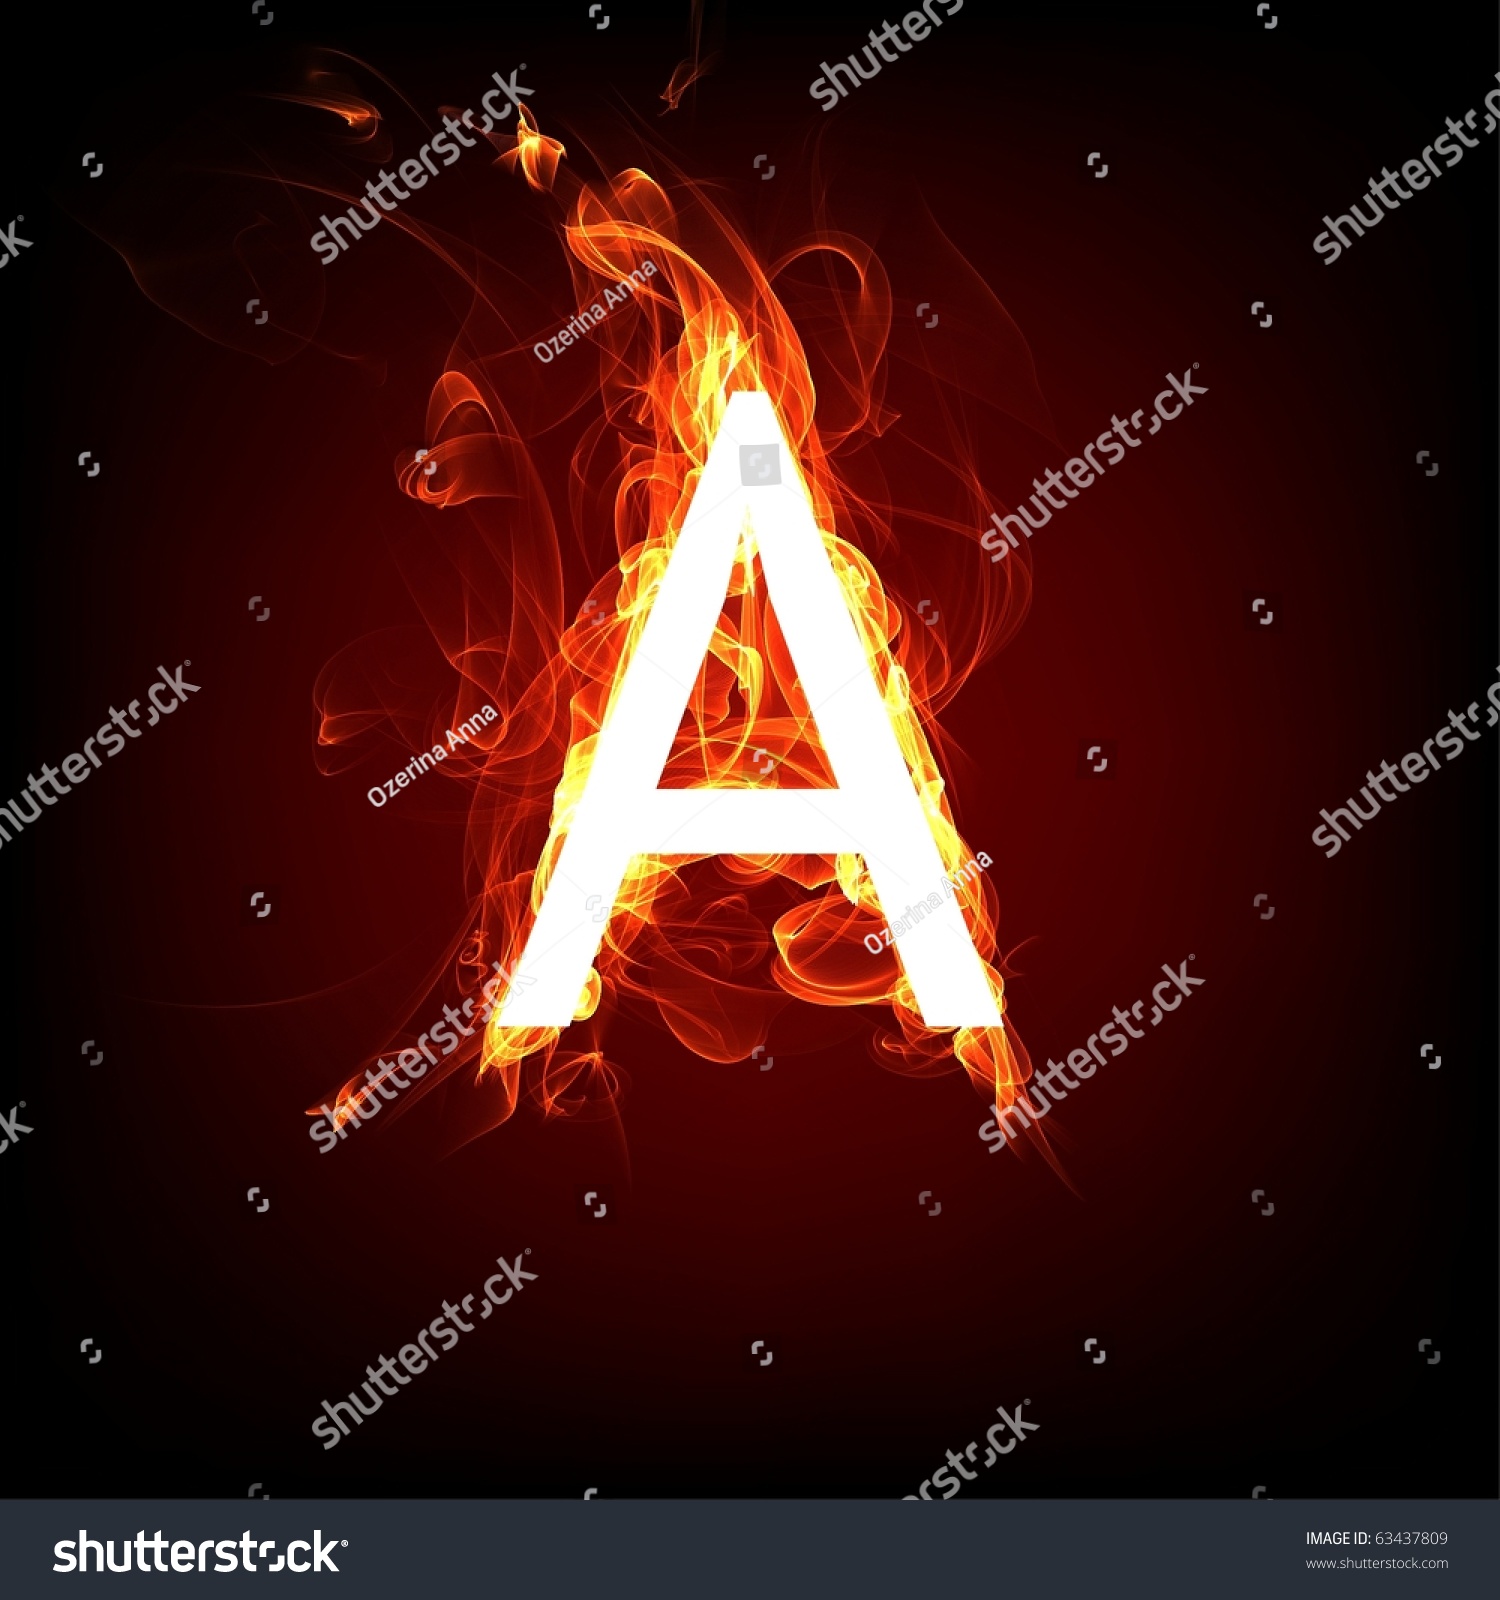 Fiery Font For Hot Flame Design. Letter A Stock Photo 63437809 ...